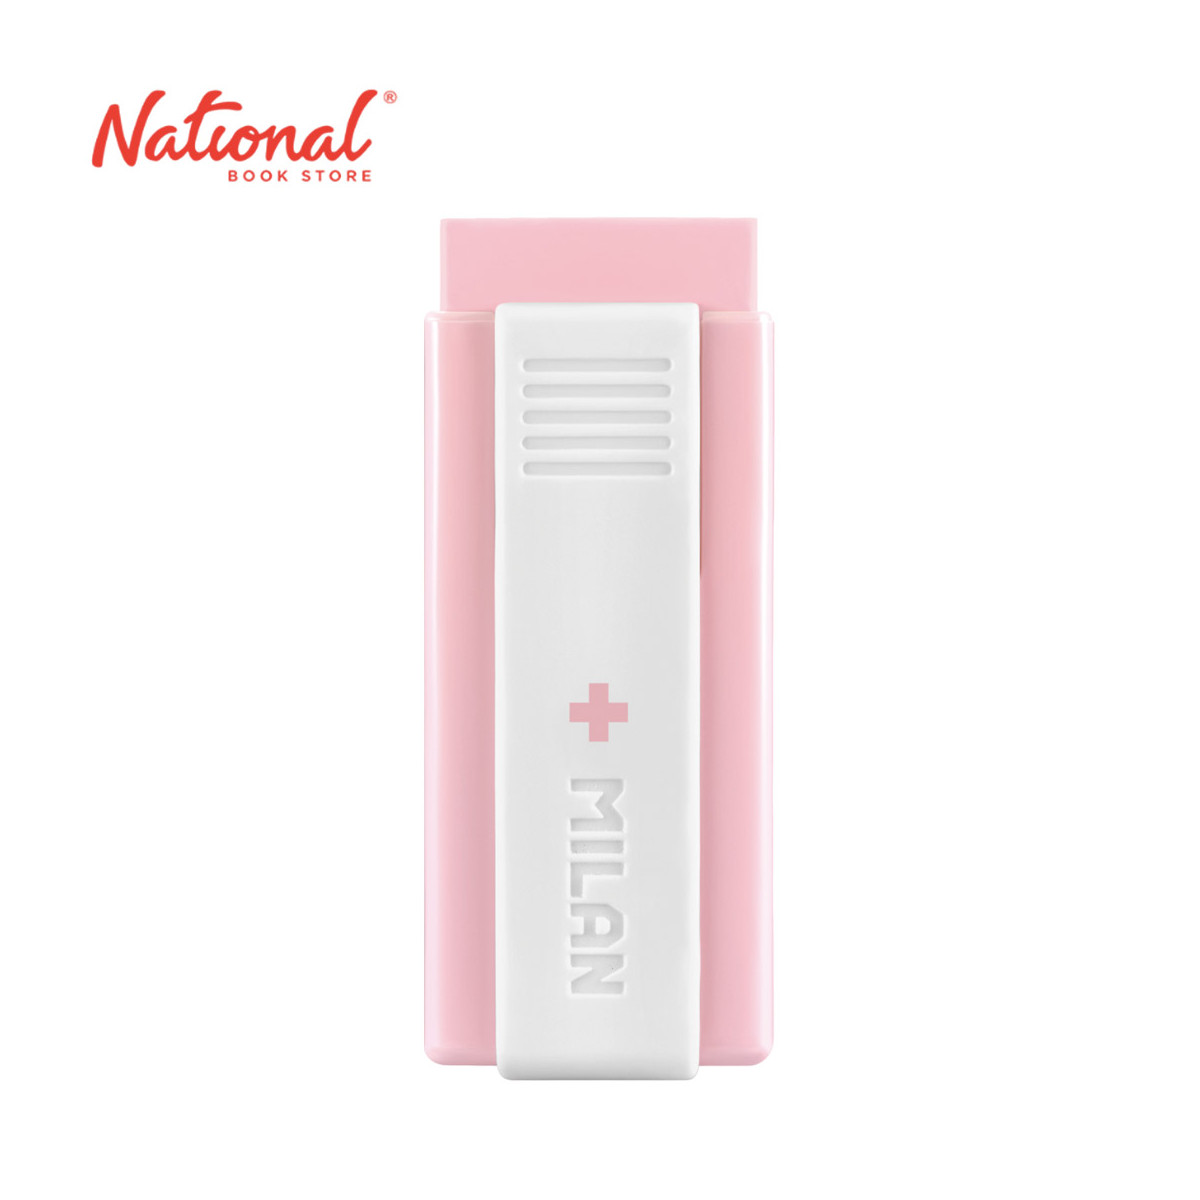 Milan Rubber Eraser Office with Cover Pink 320 BPM10457IBGP - School & Office Stationery